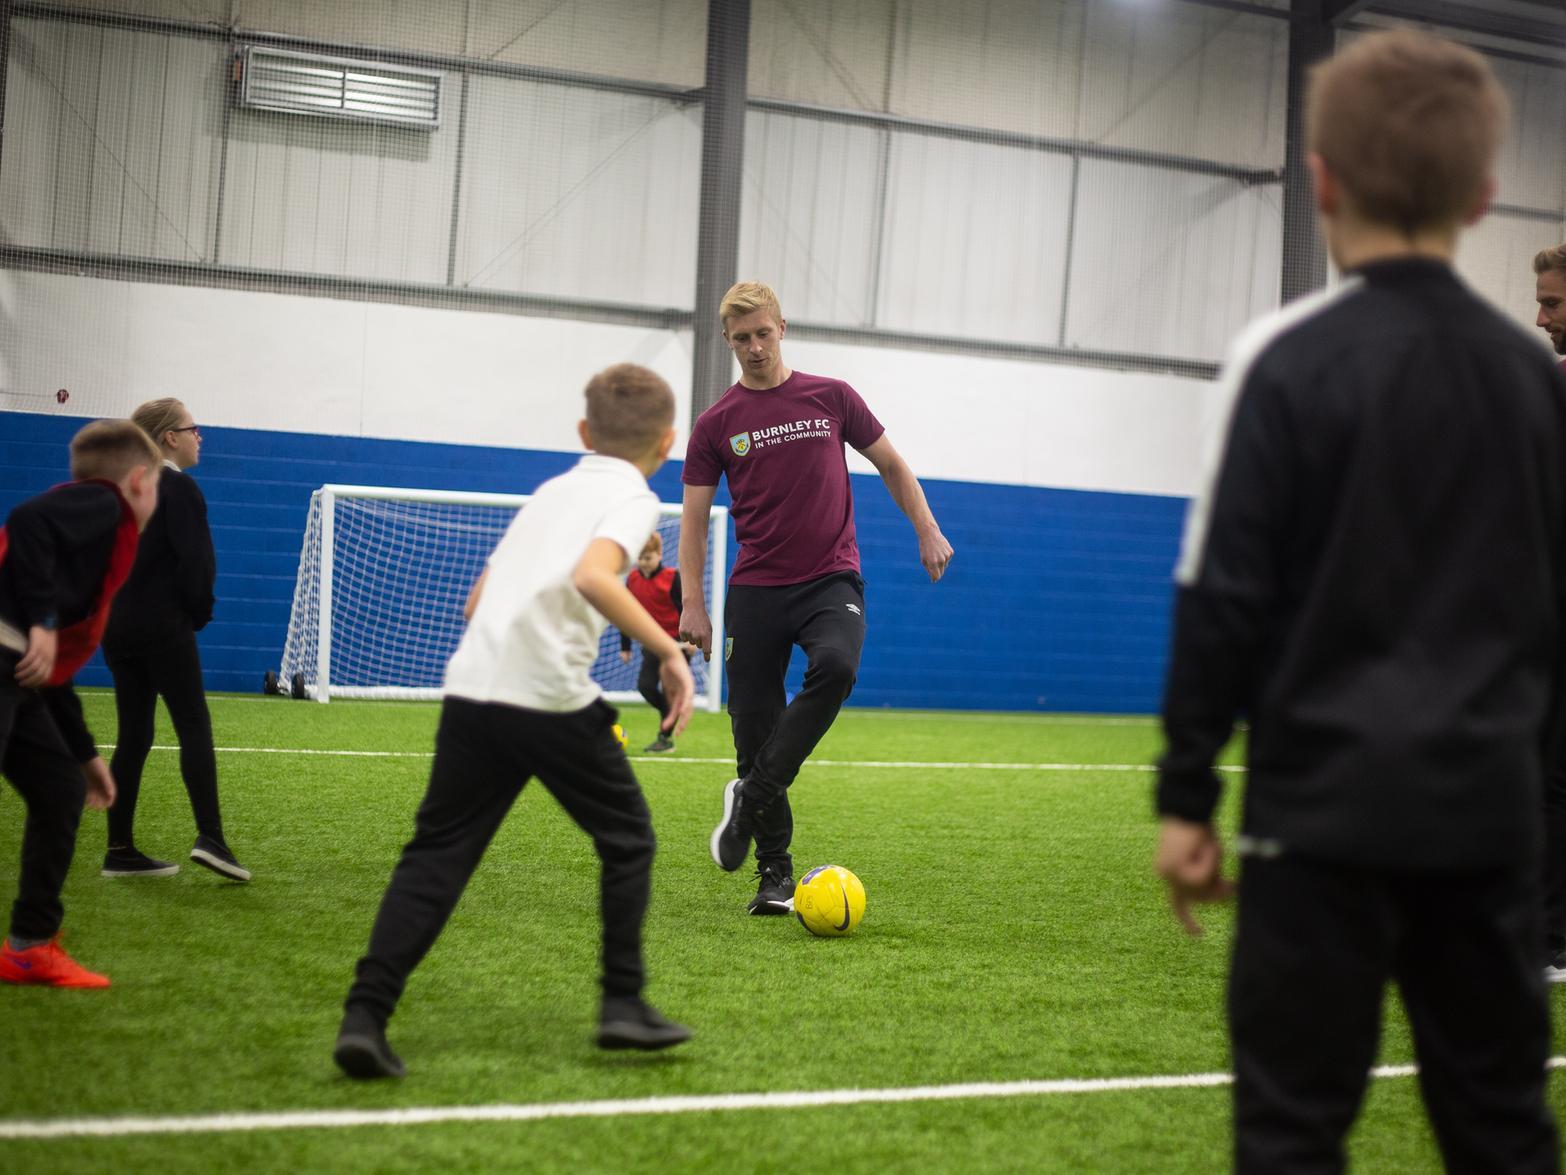 Ben Mee bamboozles the kids with some deft footwork